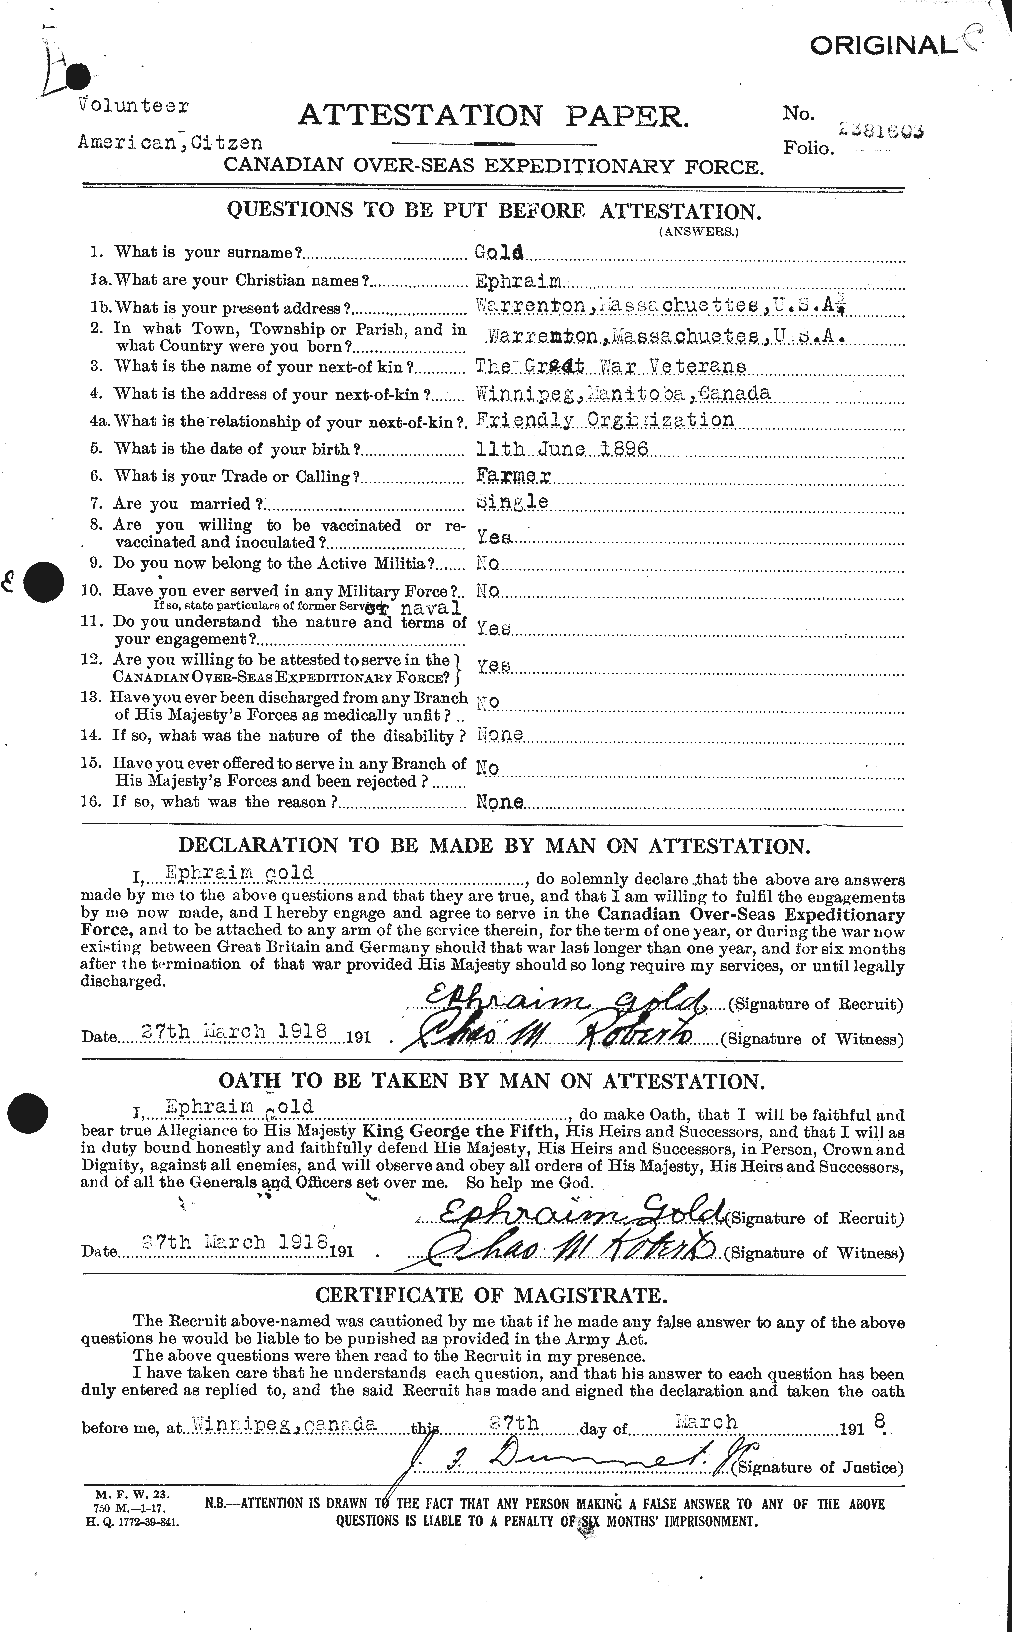 Personnel Records of the First World War - CEF 352187a